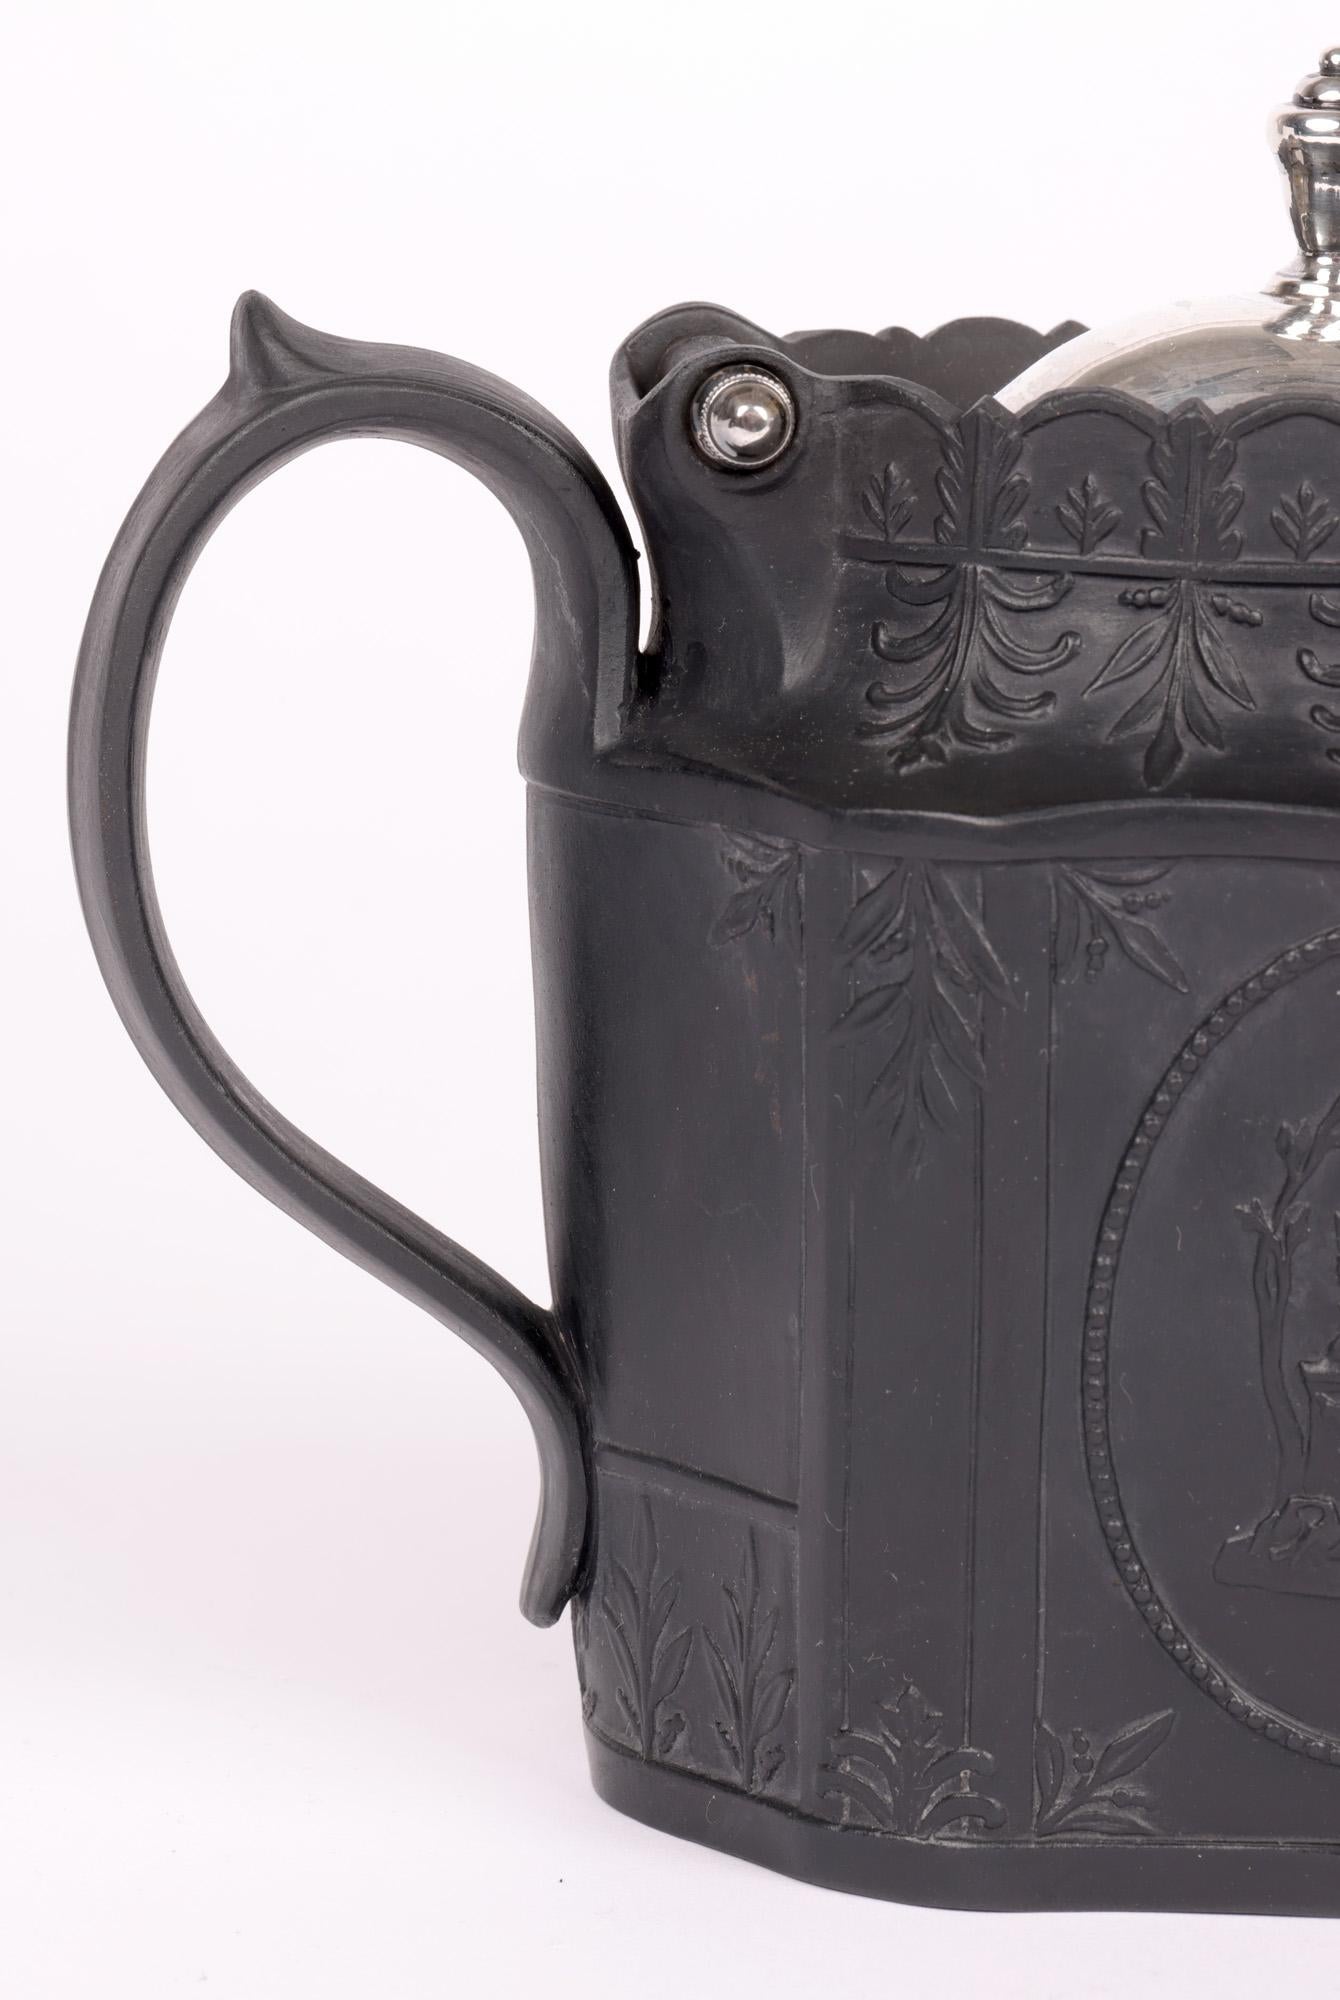 A finely made English Georgian later silver mounted black basalt teapot decorated with classical winged cherub designs to either side and dating from around 1810. The teapot has a decagon shaped body with a large raised loop pouring handle with